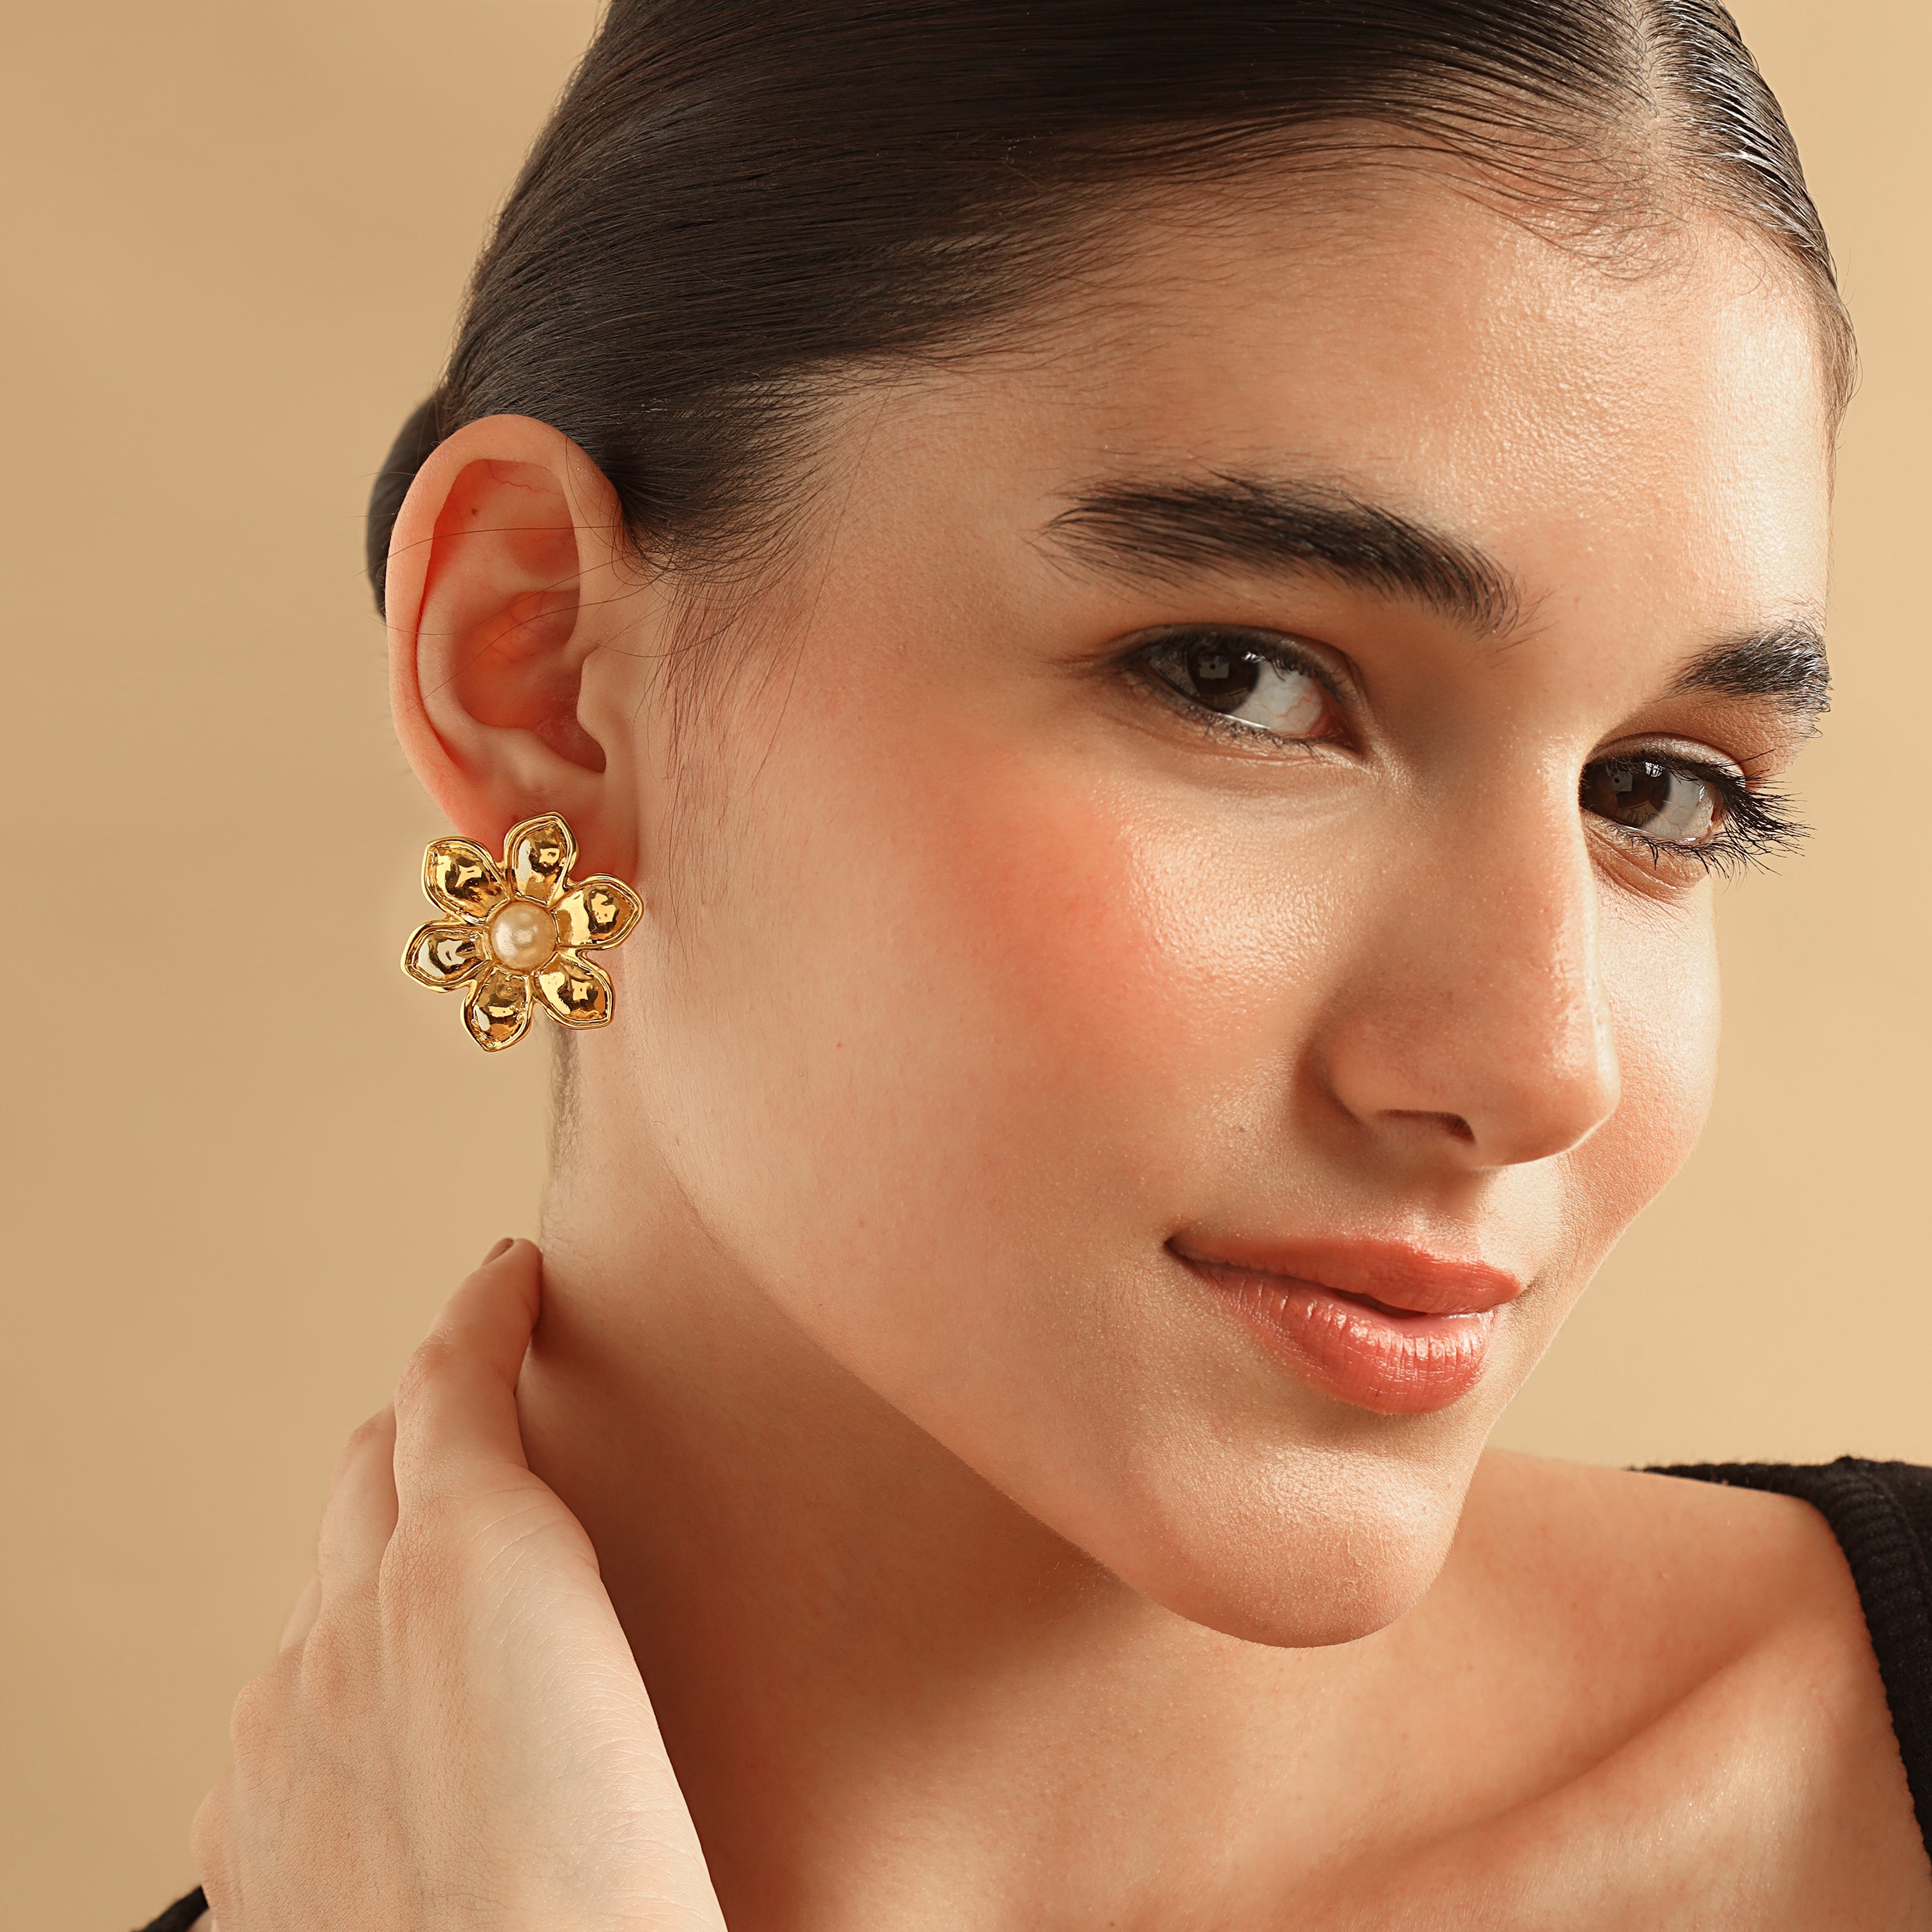 TFC Sunflower Whisperers Gold Plated Pearl Stud Earrings- Discover daily wear gold earrings including stud earrings, hoop earrings, and pearl earrings, perfect as earrings for women and earrings for girls.Find the cheapest fashion jewellery which is anti-tarnis​h only at The Fun company